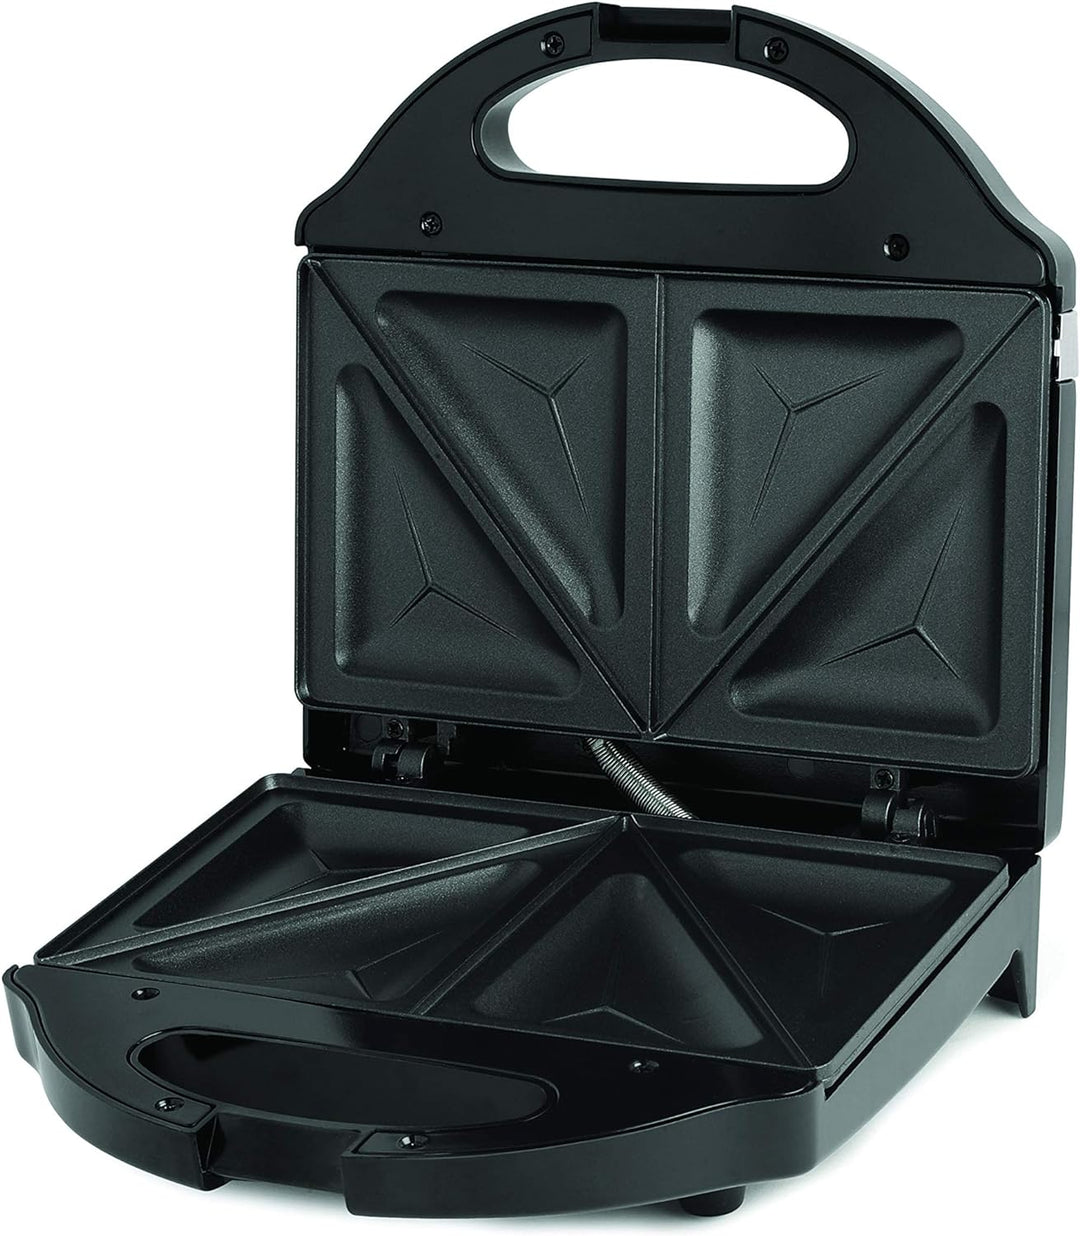 Salton Panini Maker with non-Stick Cooking Surface - Black